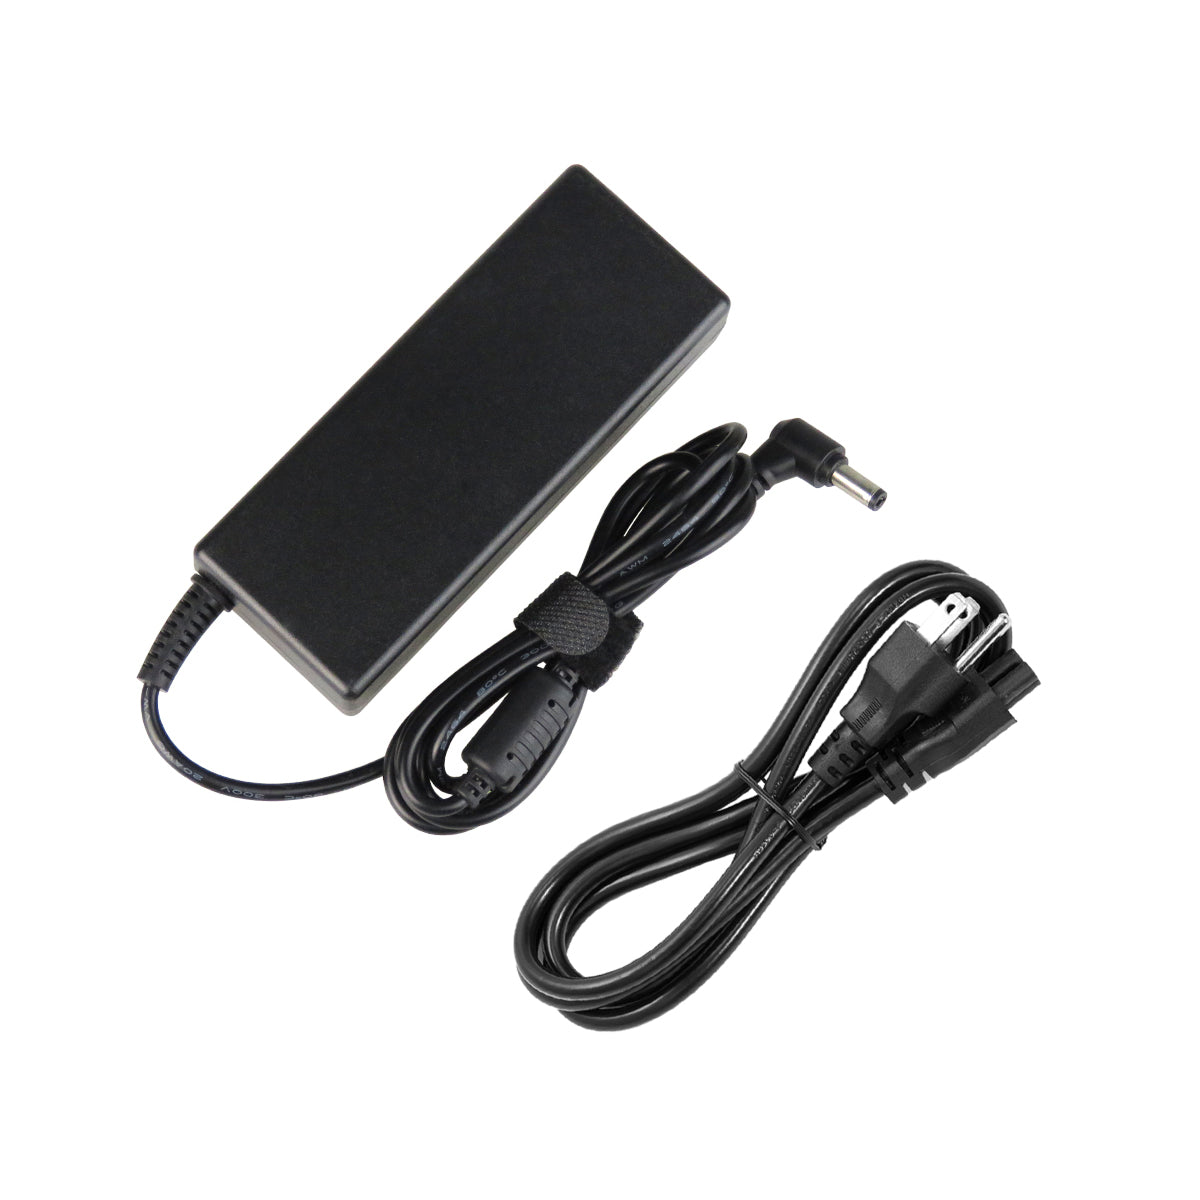 AC Adapter Charger for ASUS U57VM Notebook.